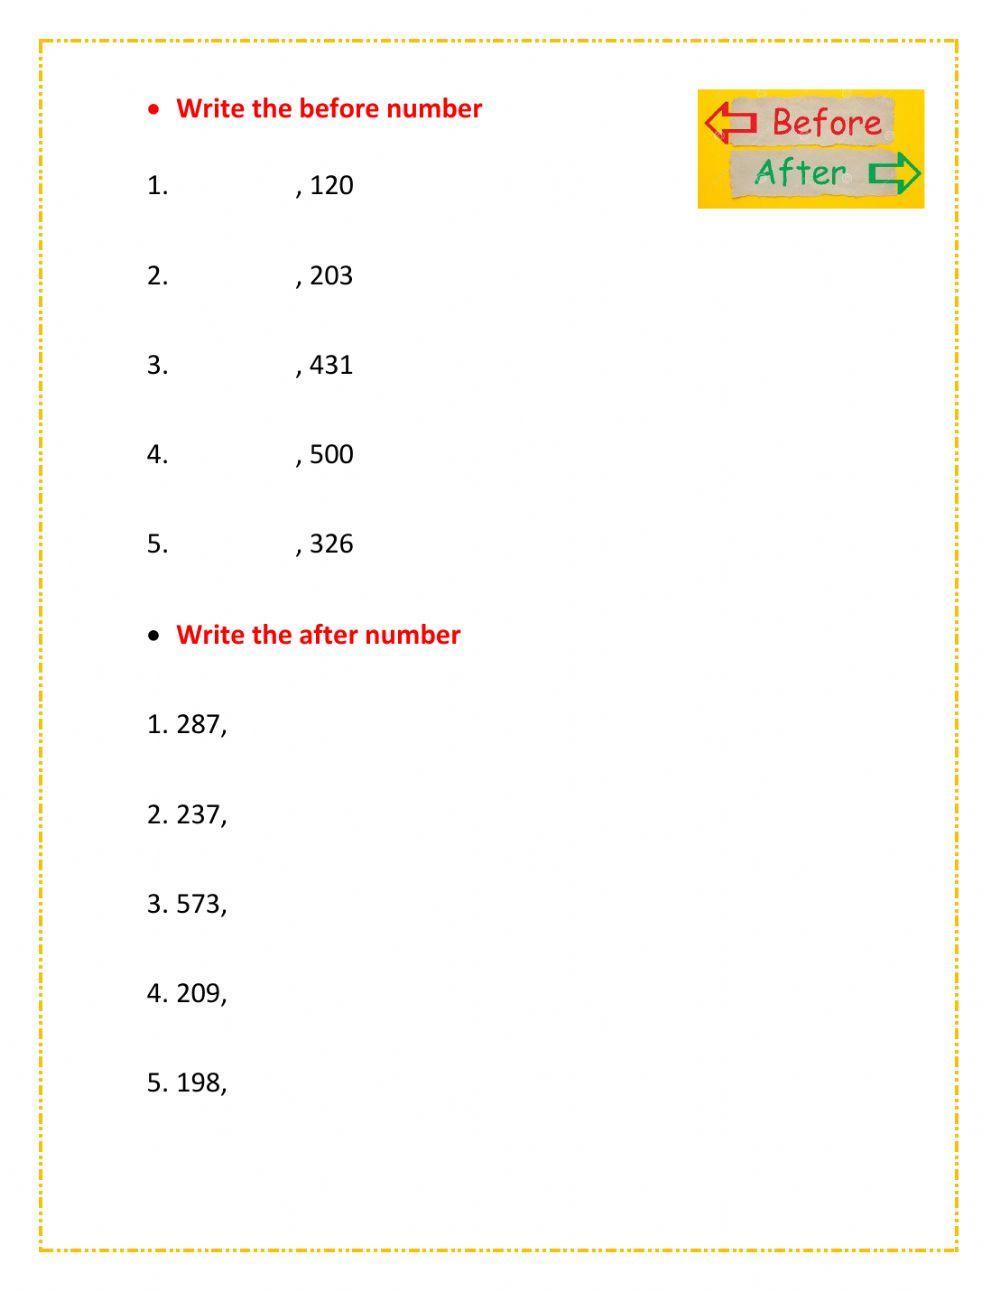 Find before and after number